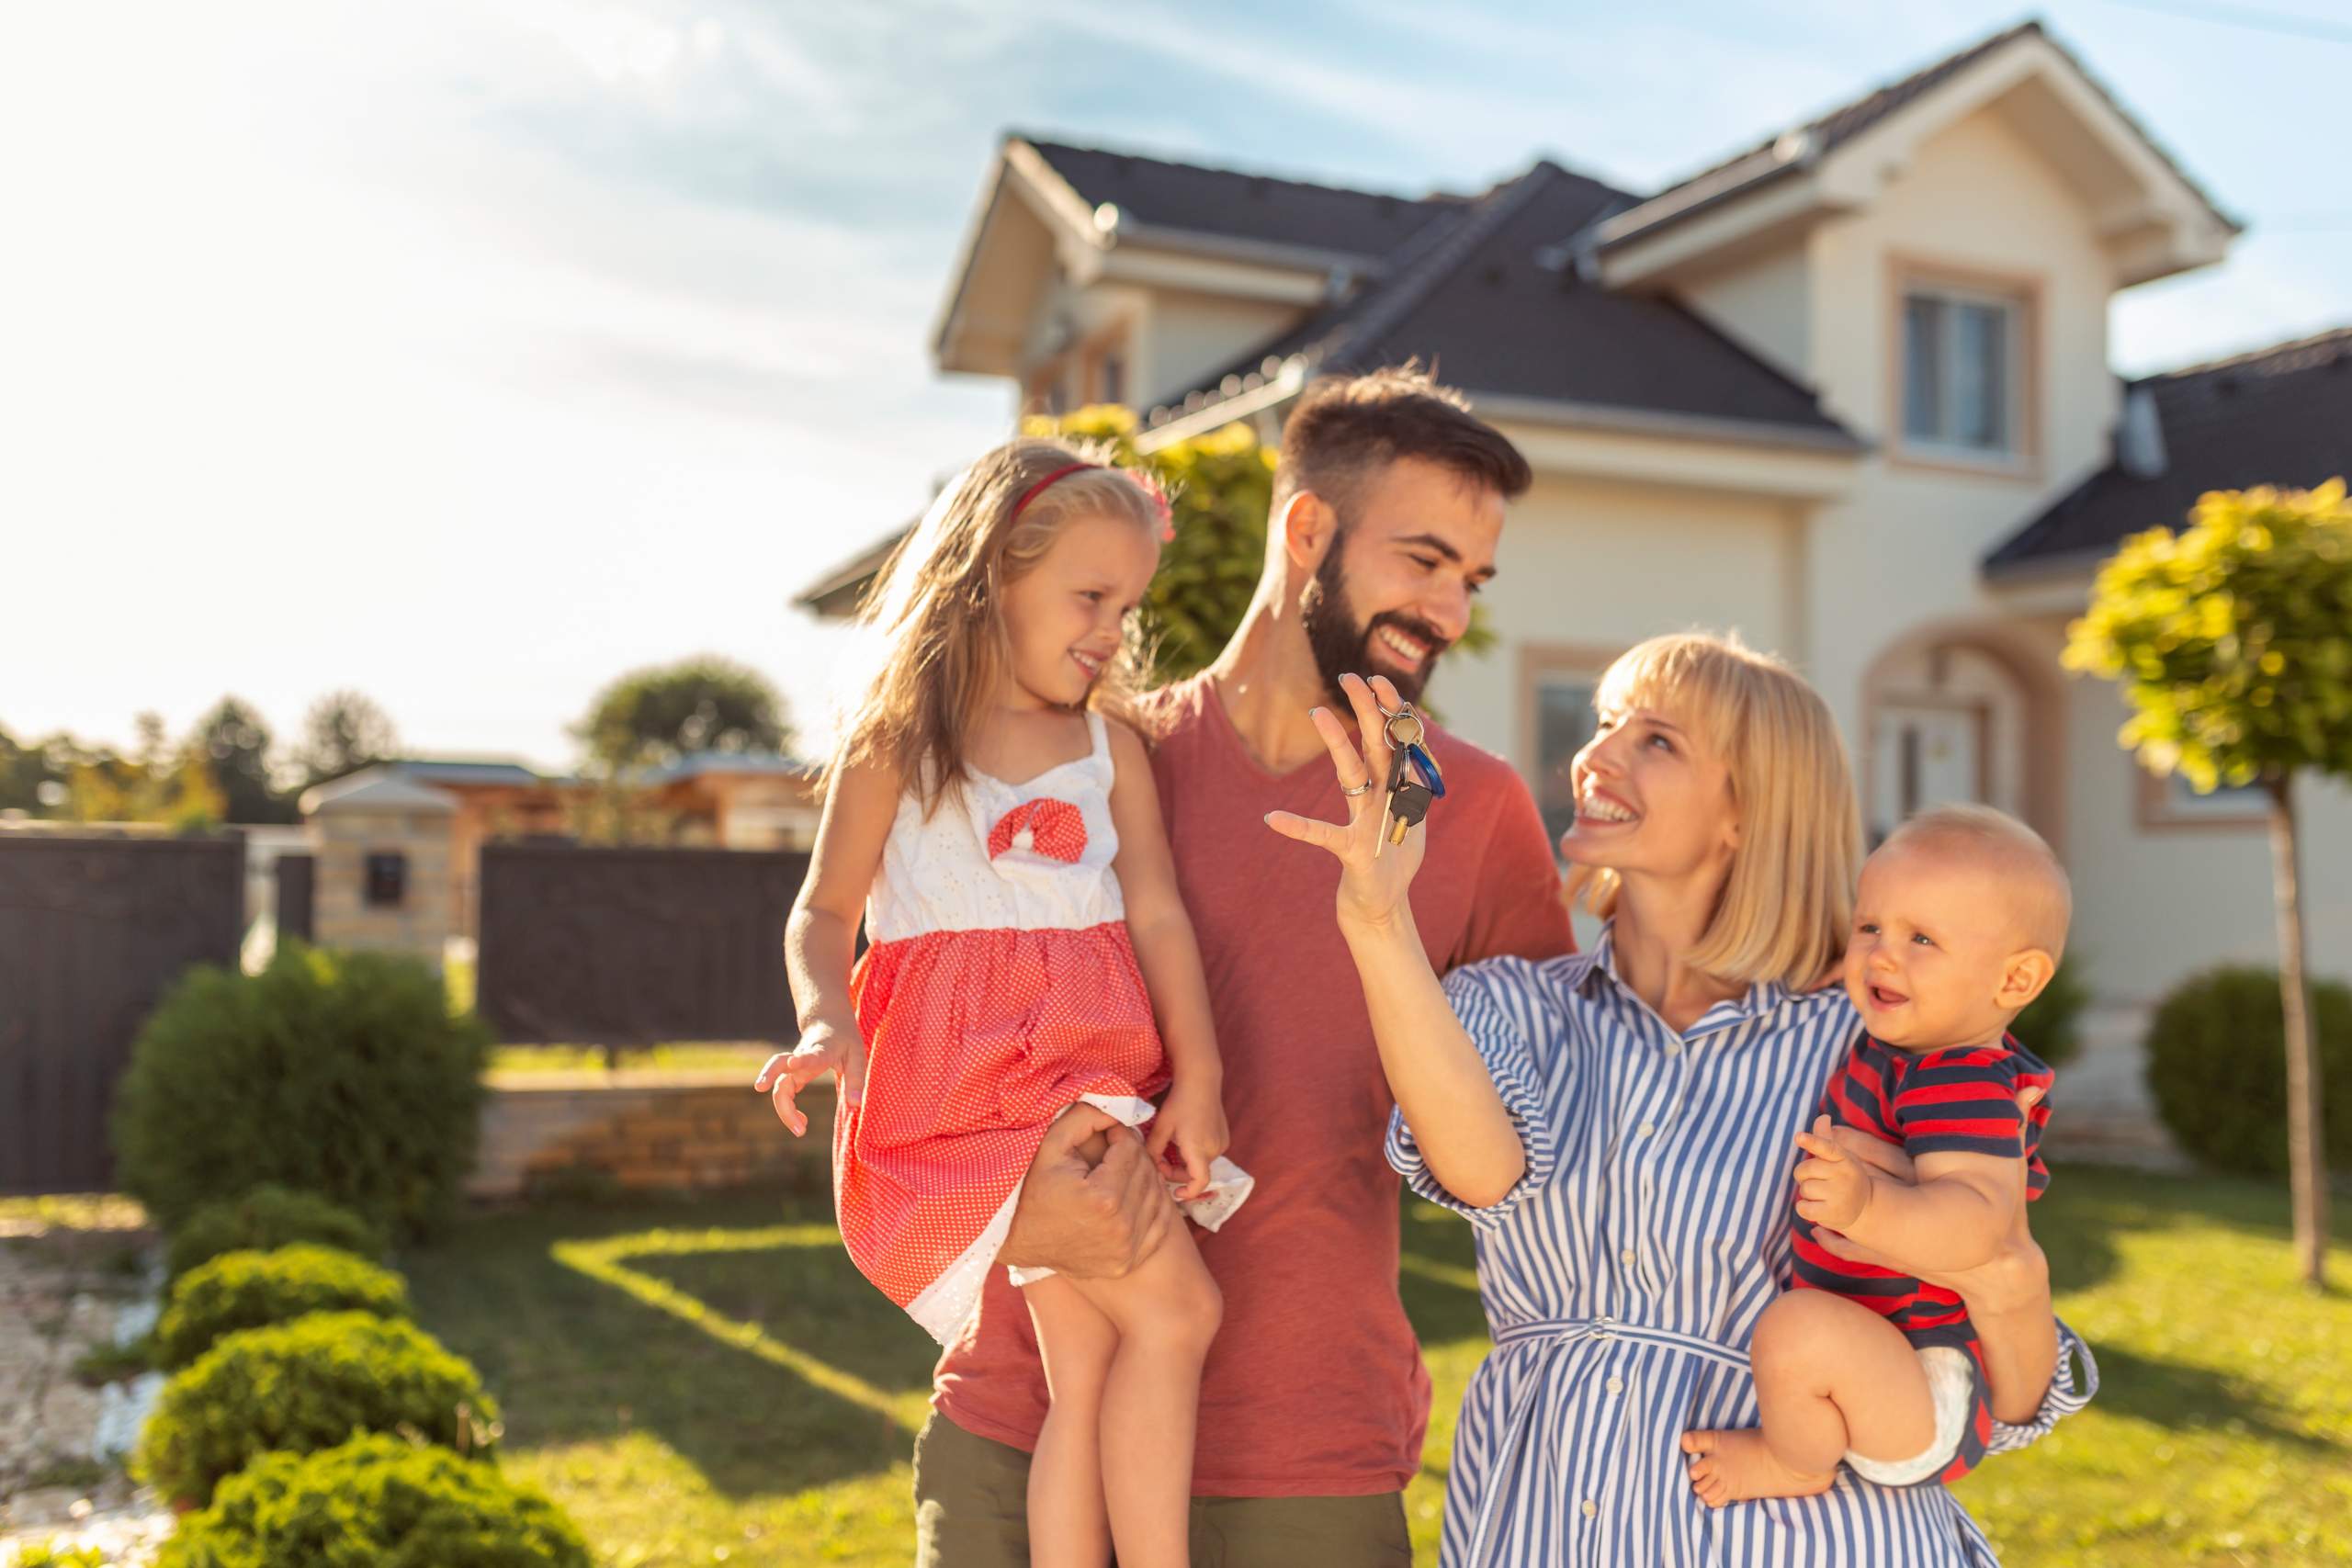 Buying a House for Your Family